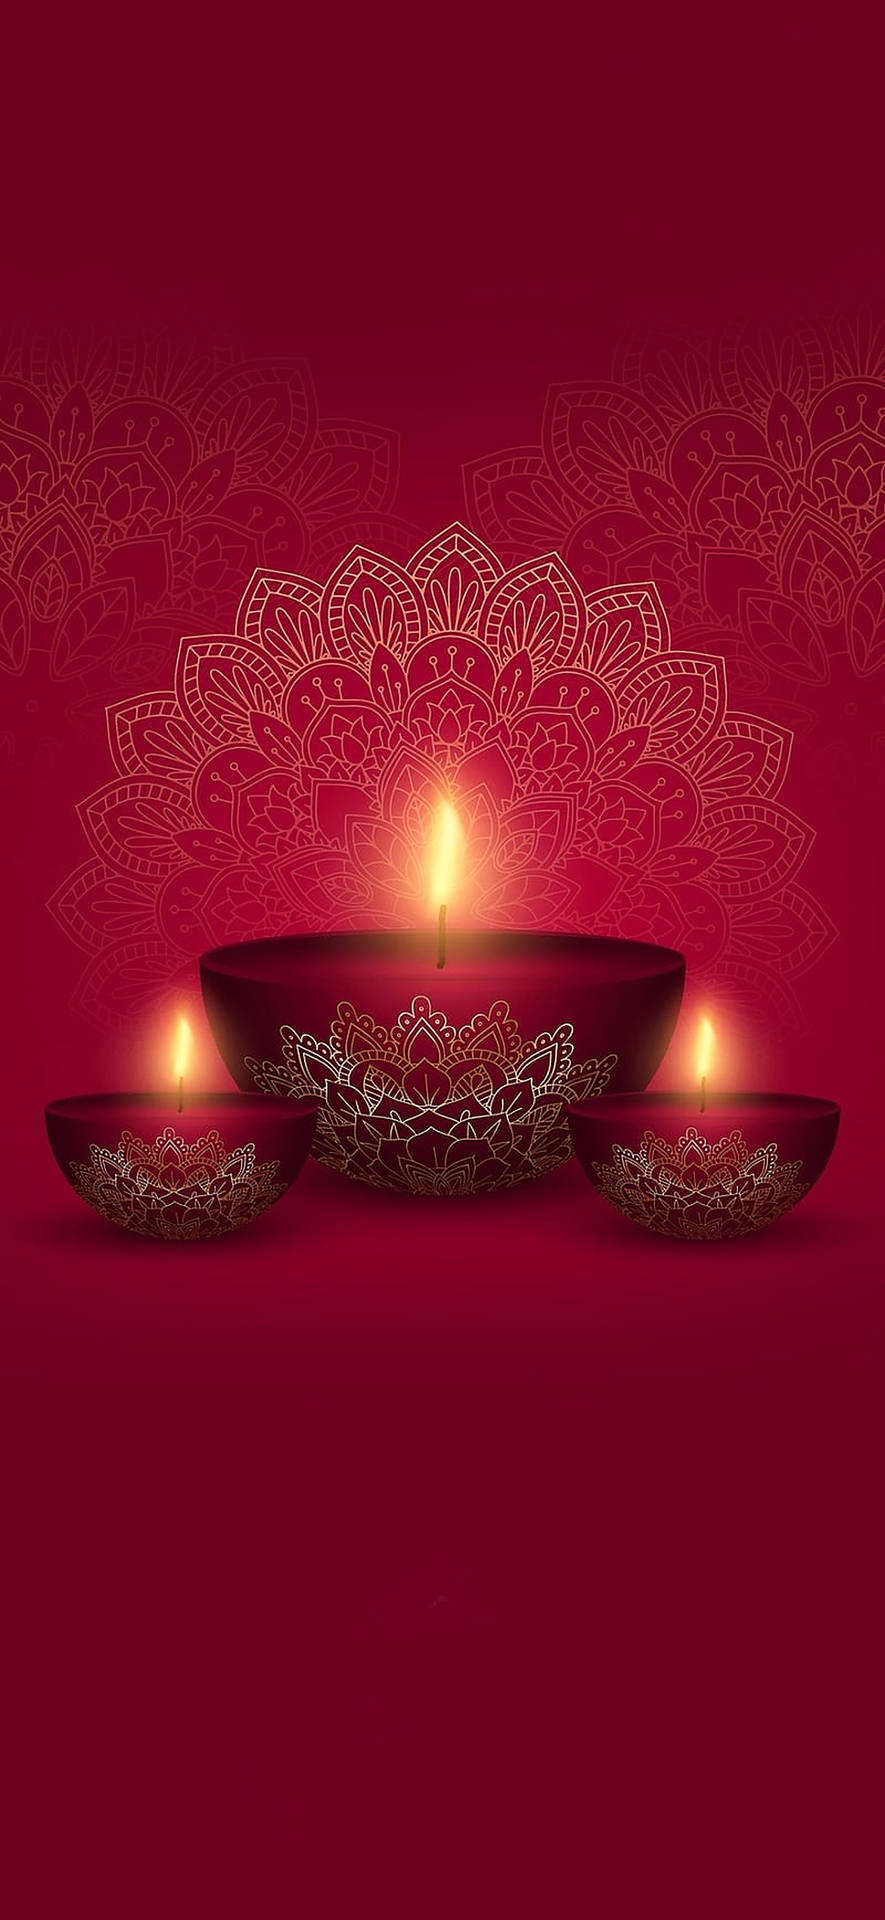 Illuminated Red Diwali Lamps On A Festive Night Background